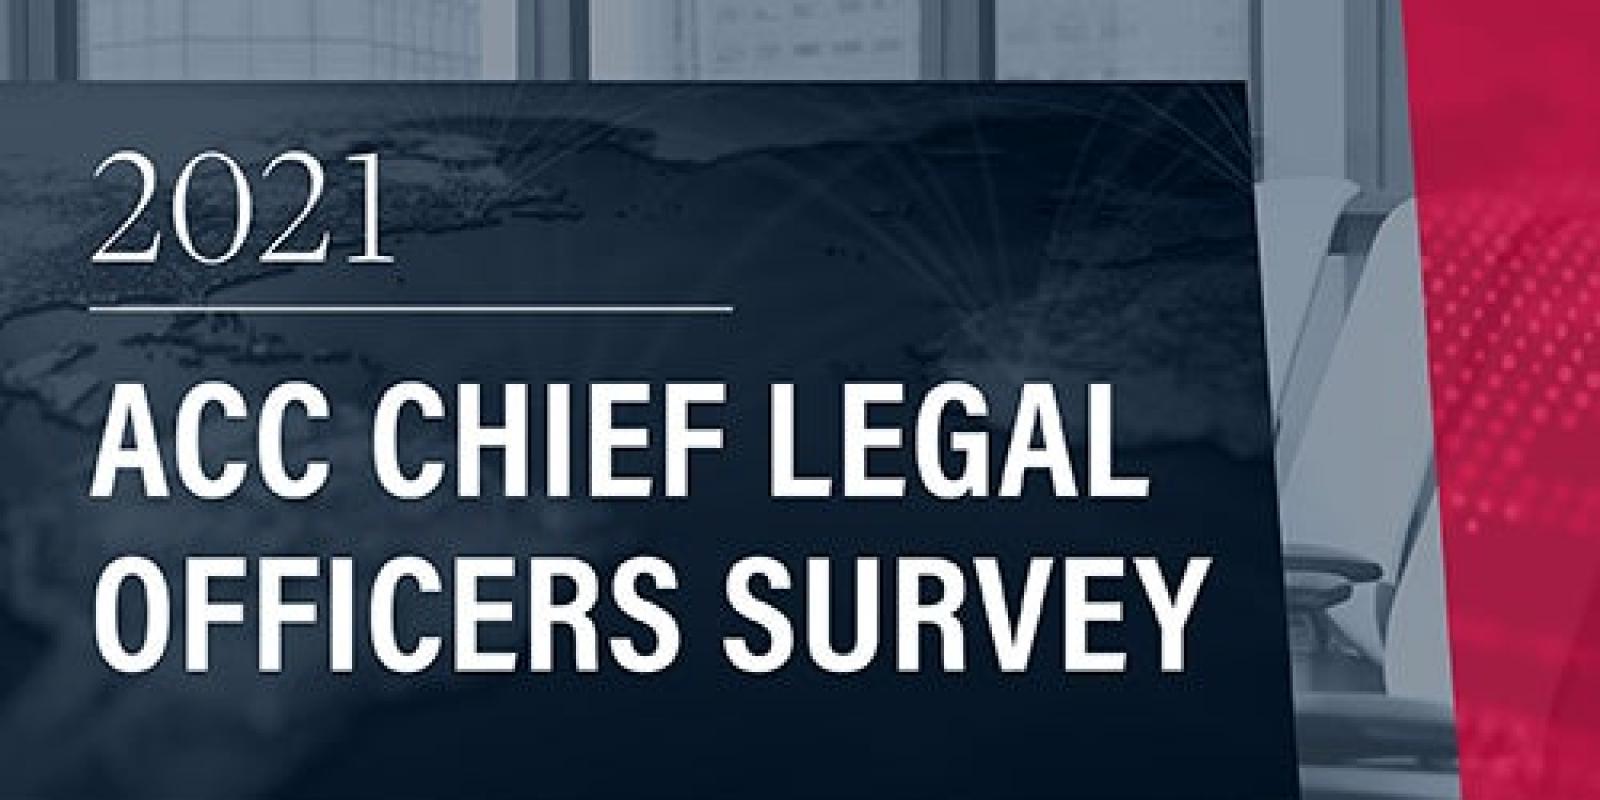 2021 ACC Chief Legal Officers Survey promo image